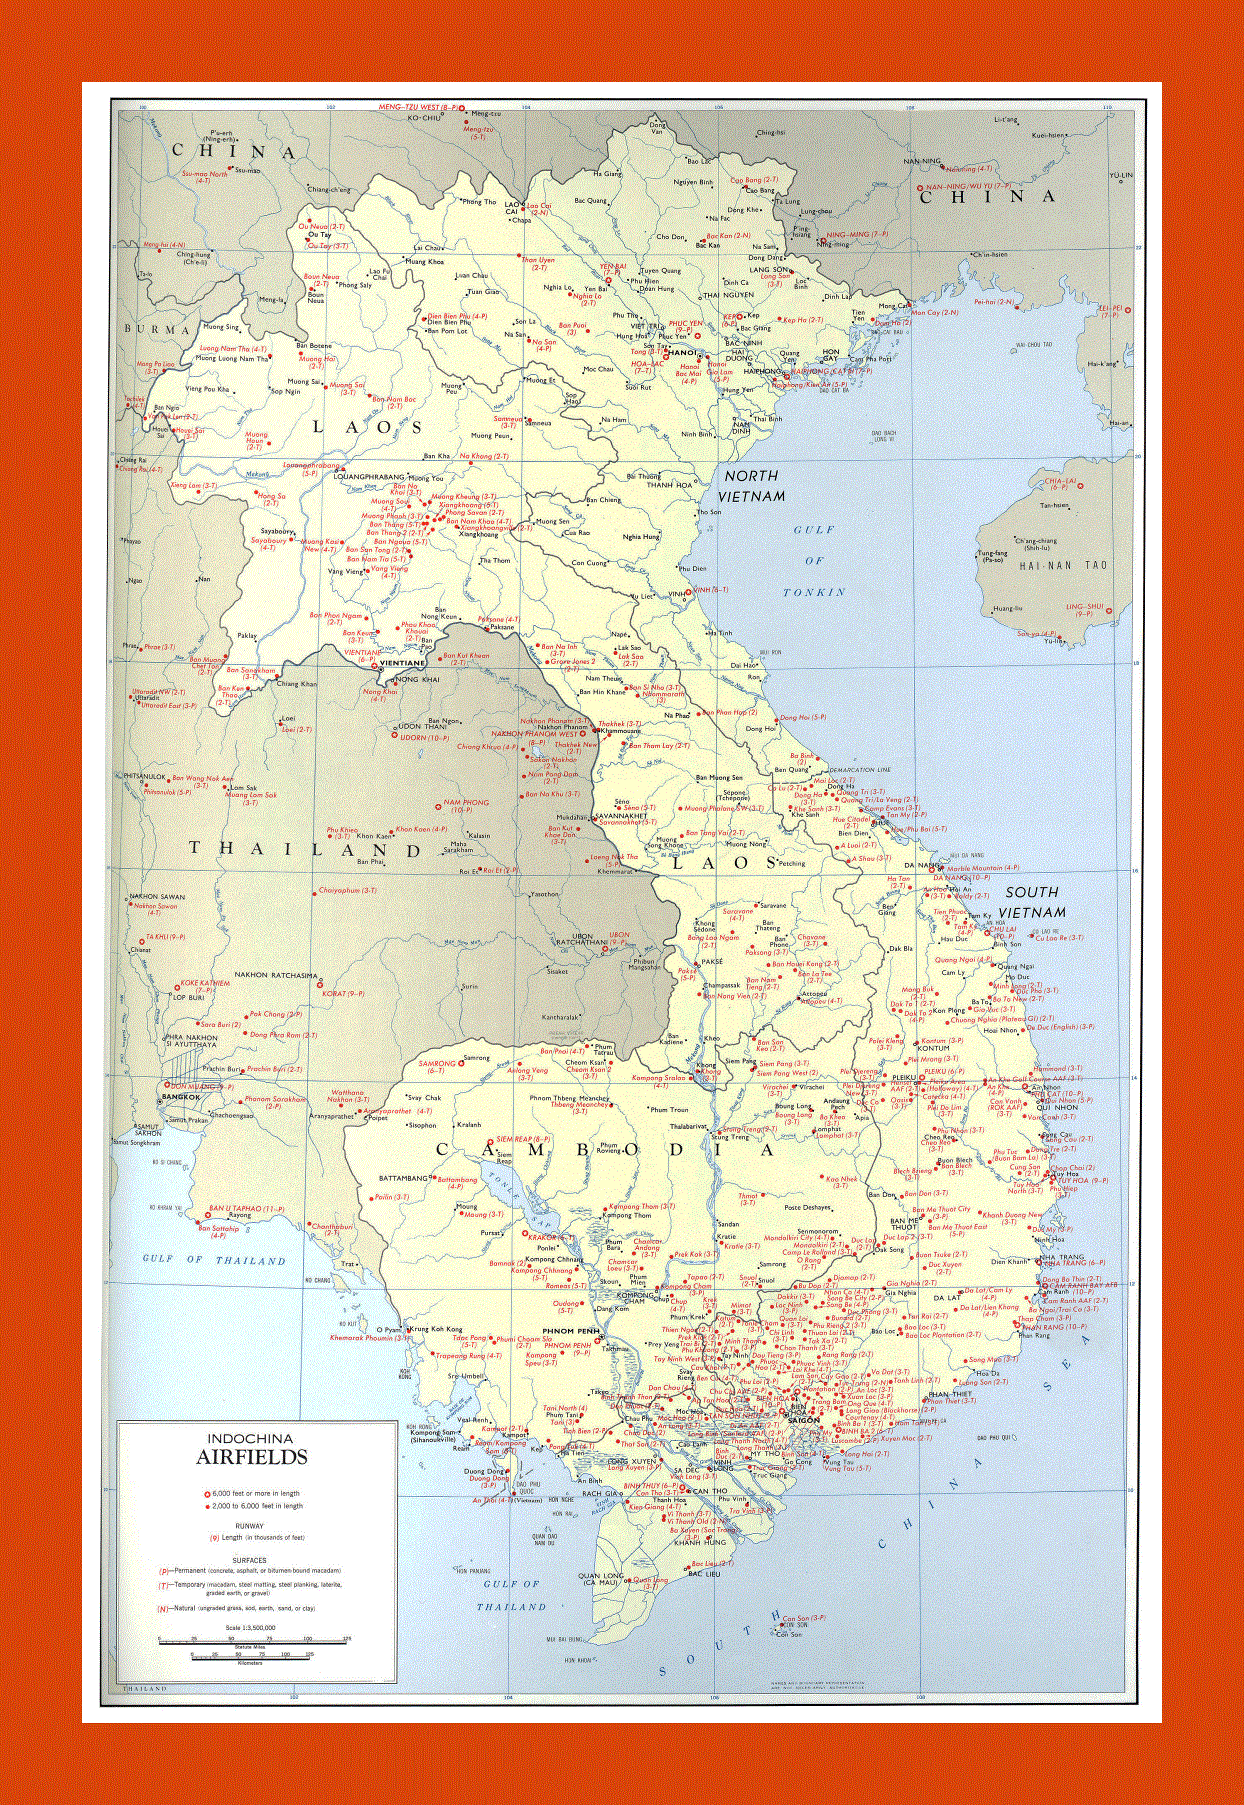 Airfields map of Indochina - 1970